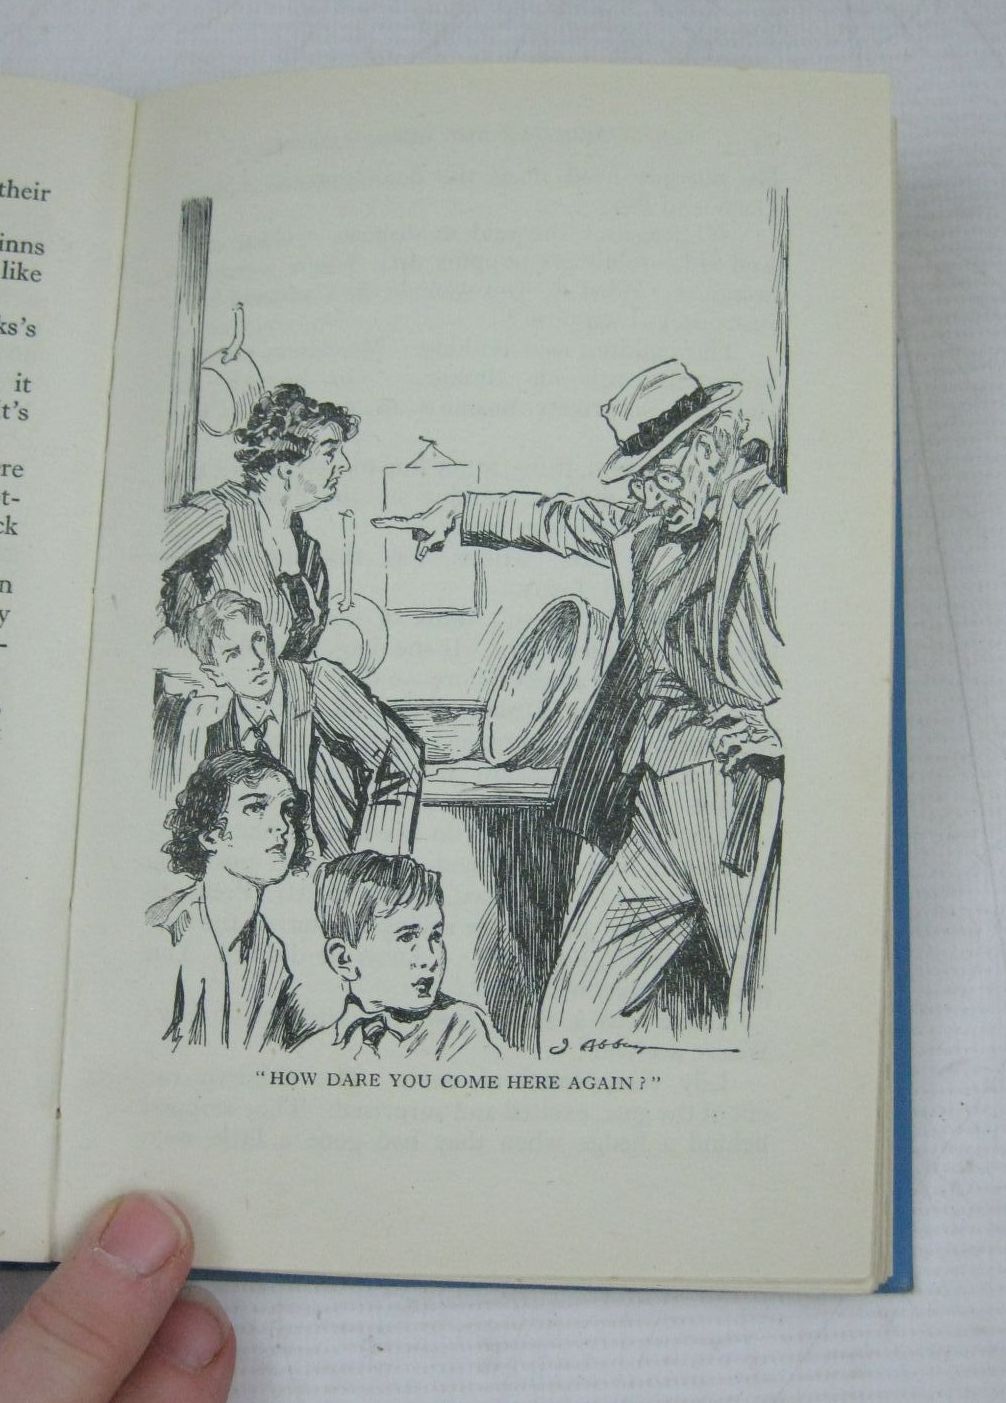 Photo of THE MYSTERY OF THE BURNT COTTAGE written by Blyton, Enid illustrated by Abbey, J. published by Methuen & Co. Ltd. (STOCK CODE: 1315317)  for sale by Stella & Rose's Books